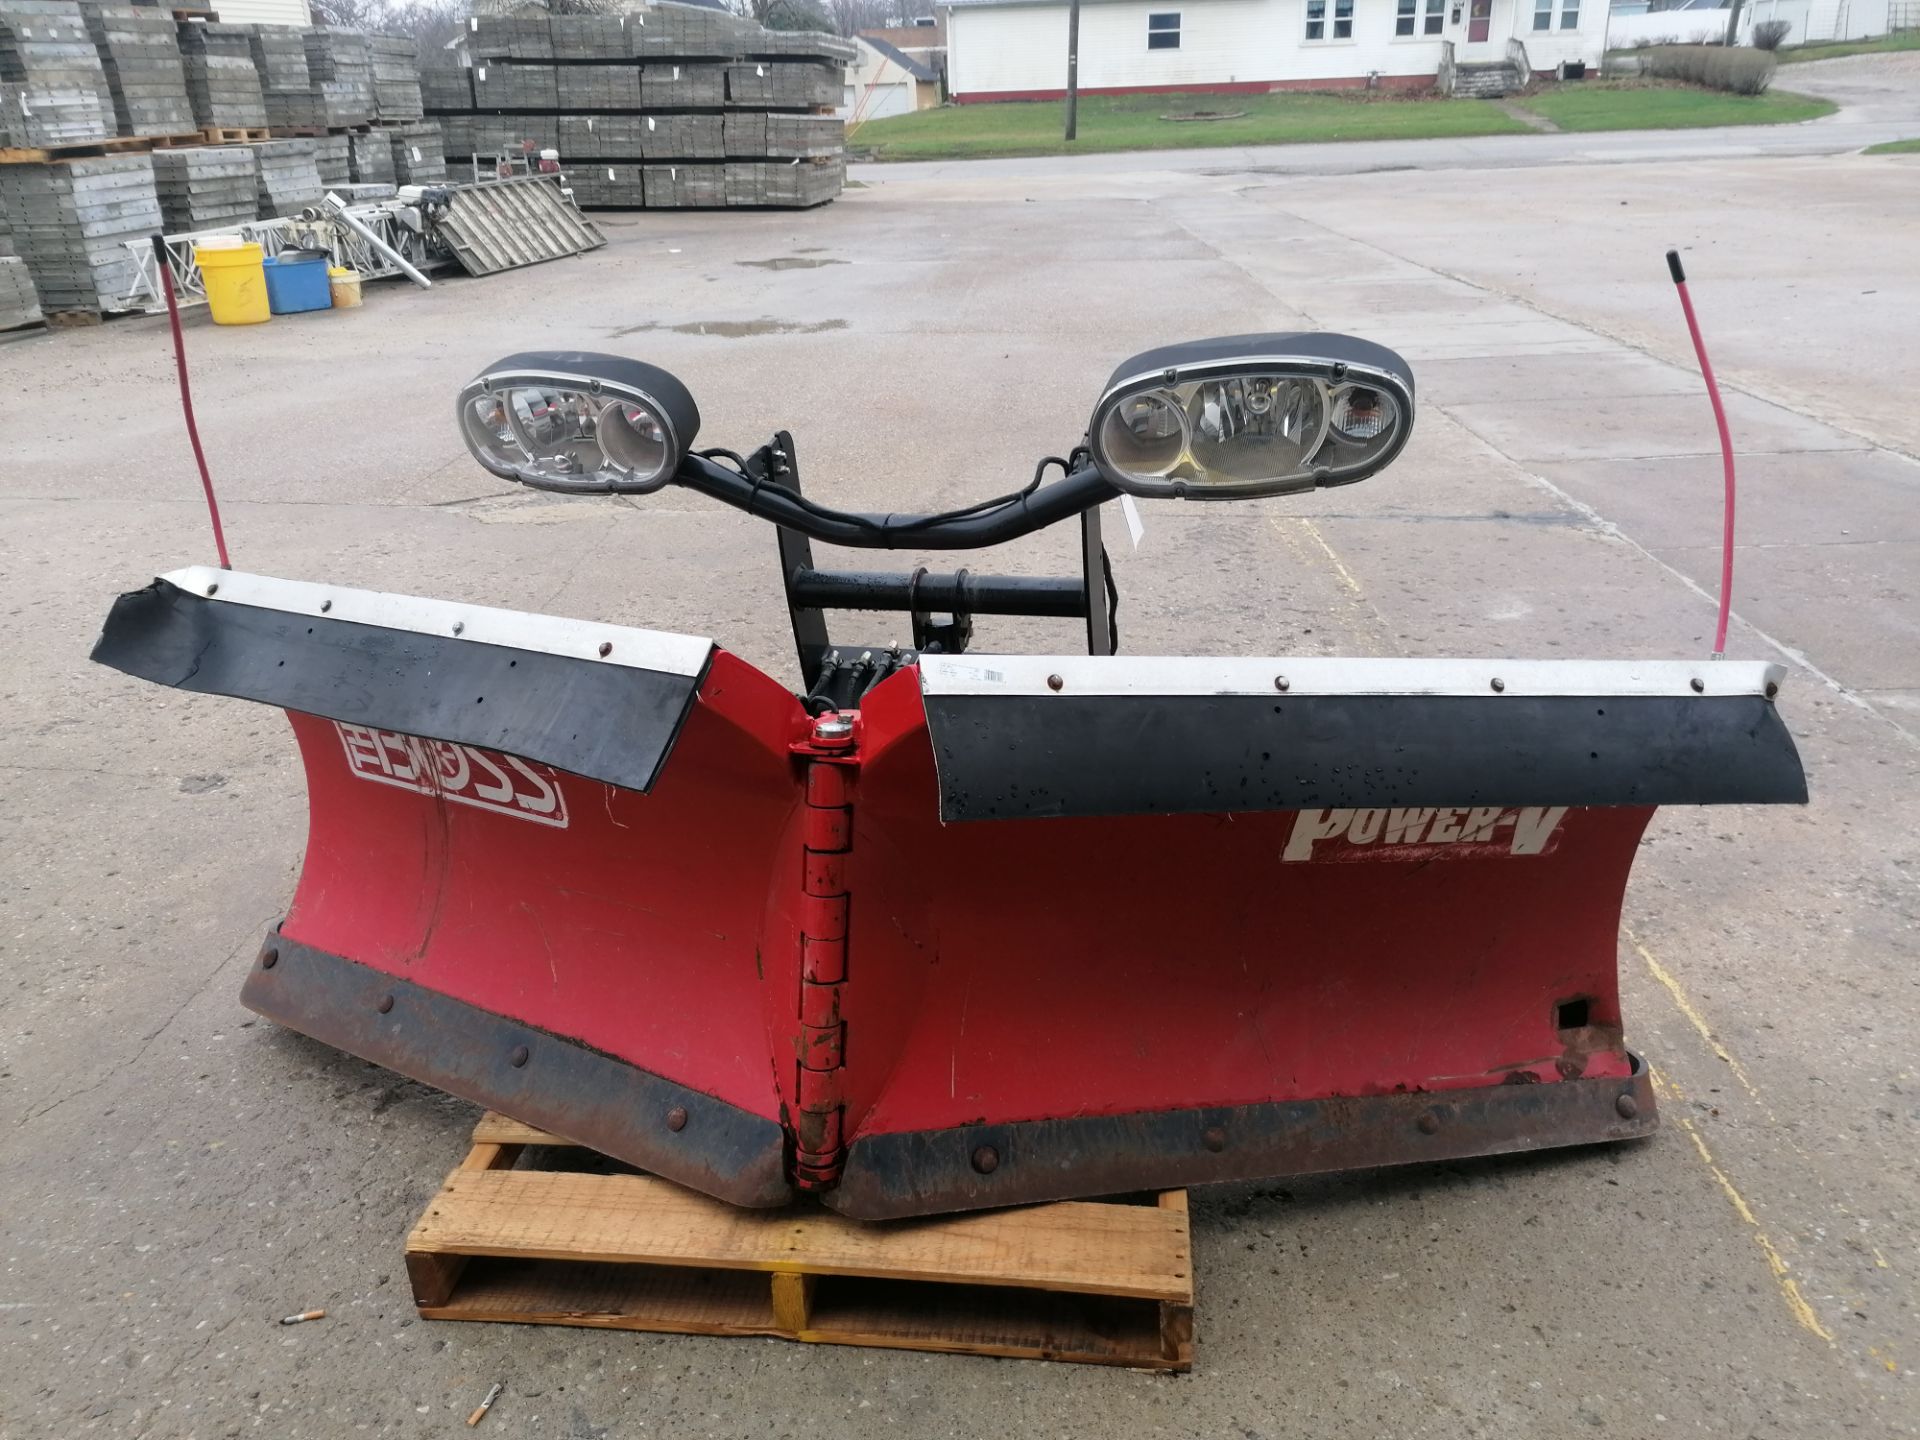 (1) 8' 2" THE BOSS Power-V Snow Plow, Serial #BC086809. Located in Mt. Pleasant, IA.